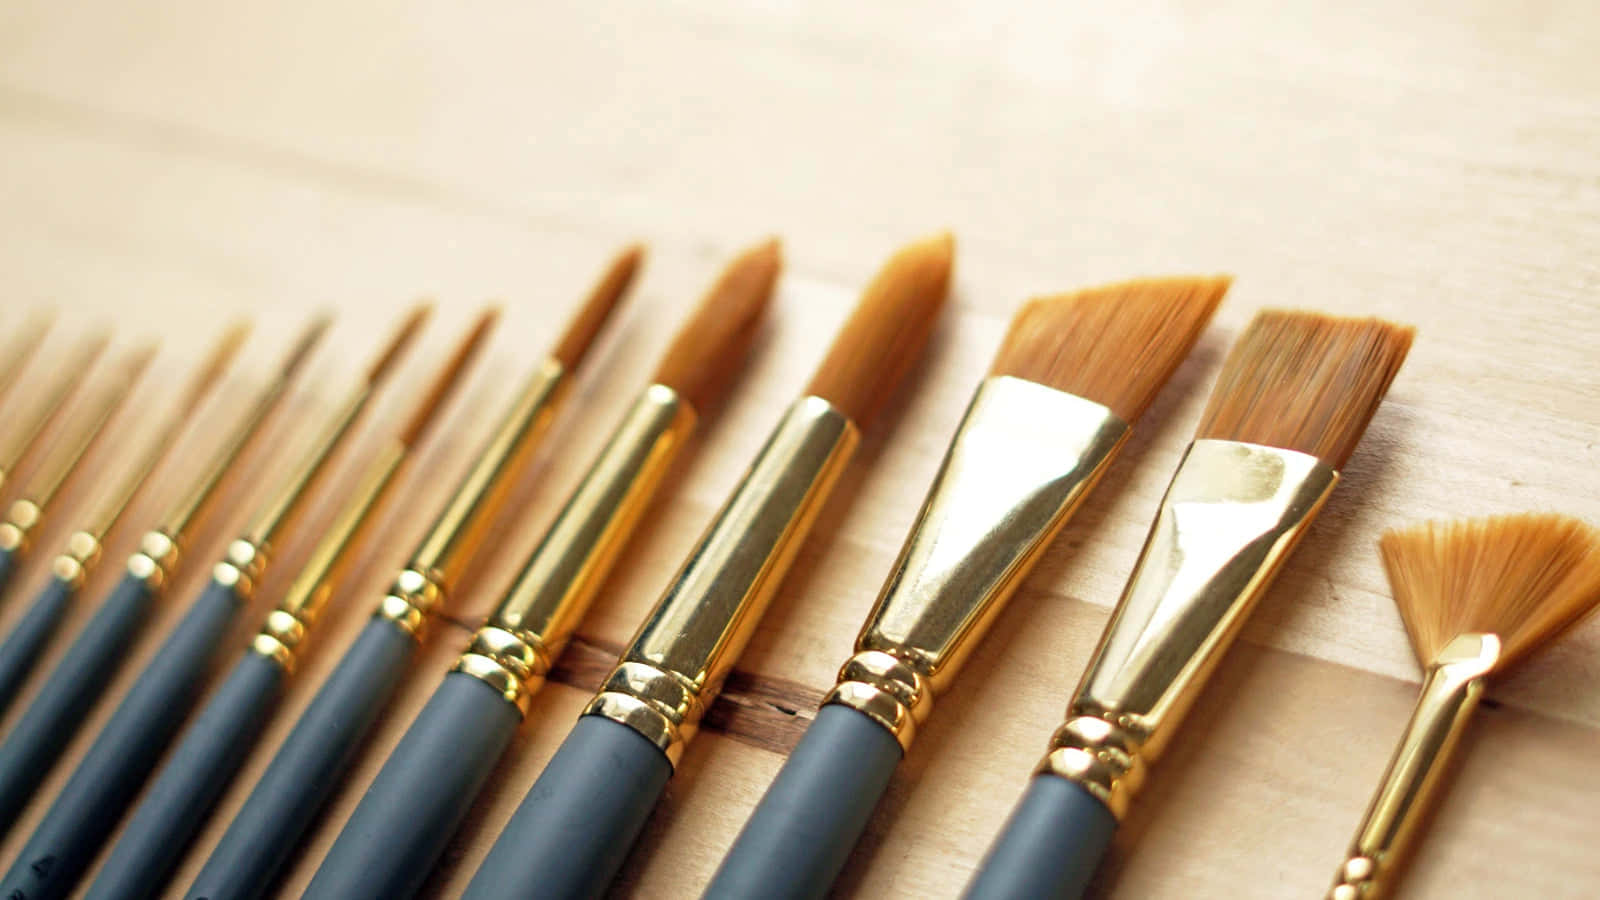 A Group Of Brushes With Gold Handles On A Wooden Surface